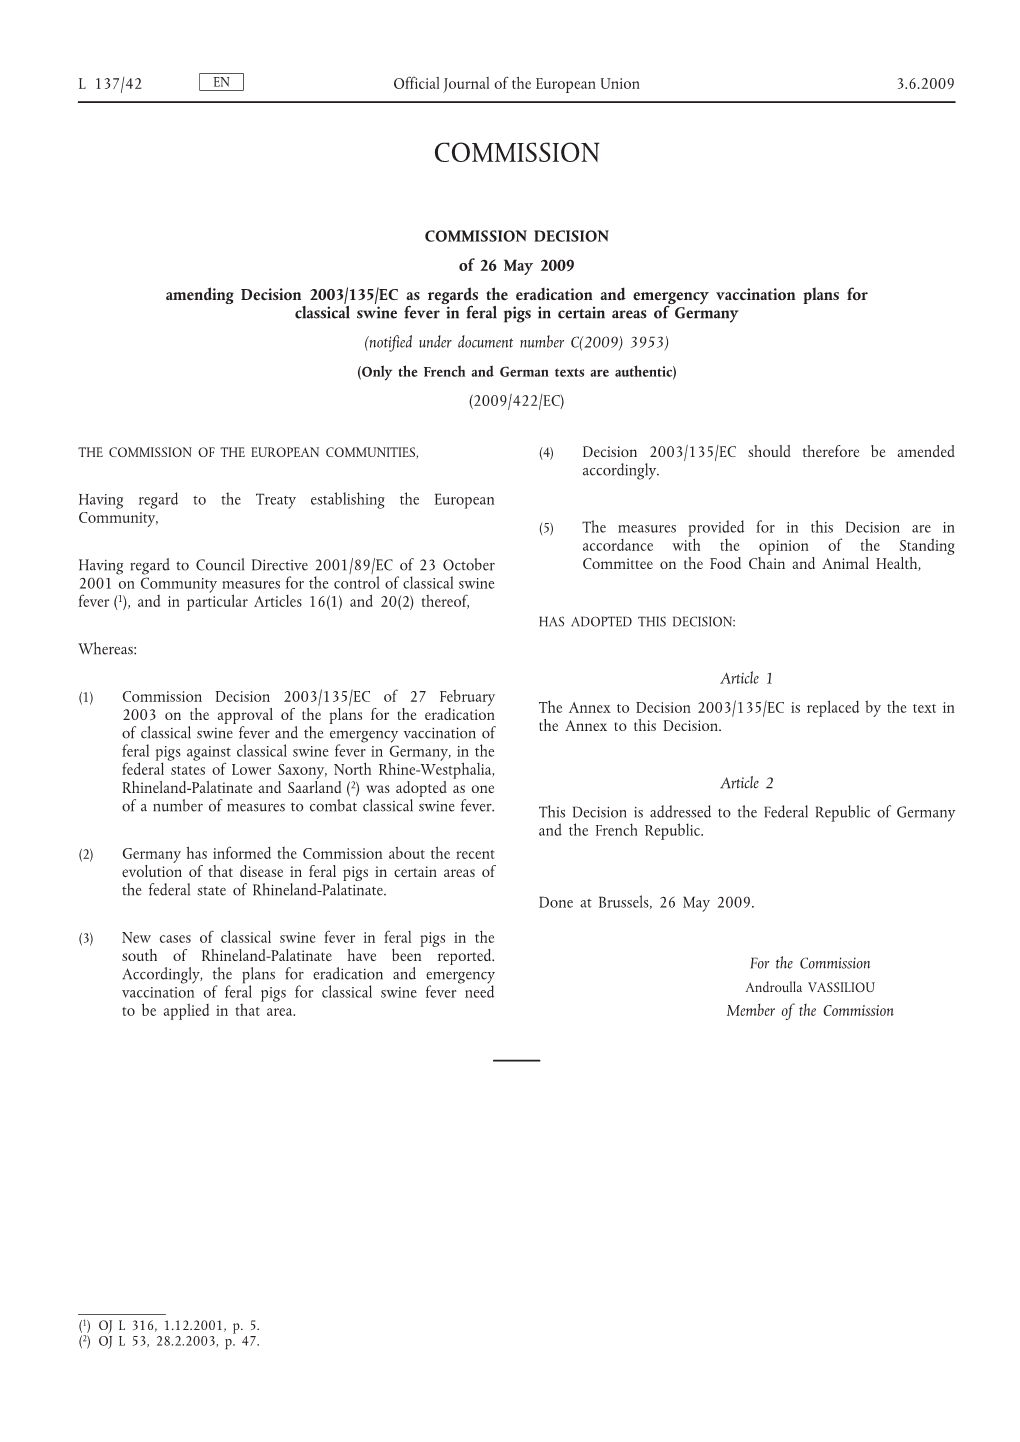 Commission Decision of 26 May 2009 Amending Decision 2003/135/EC